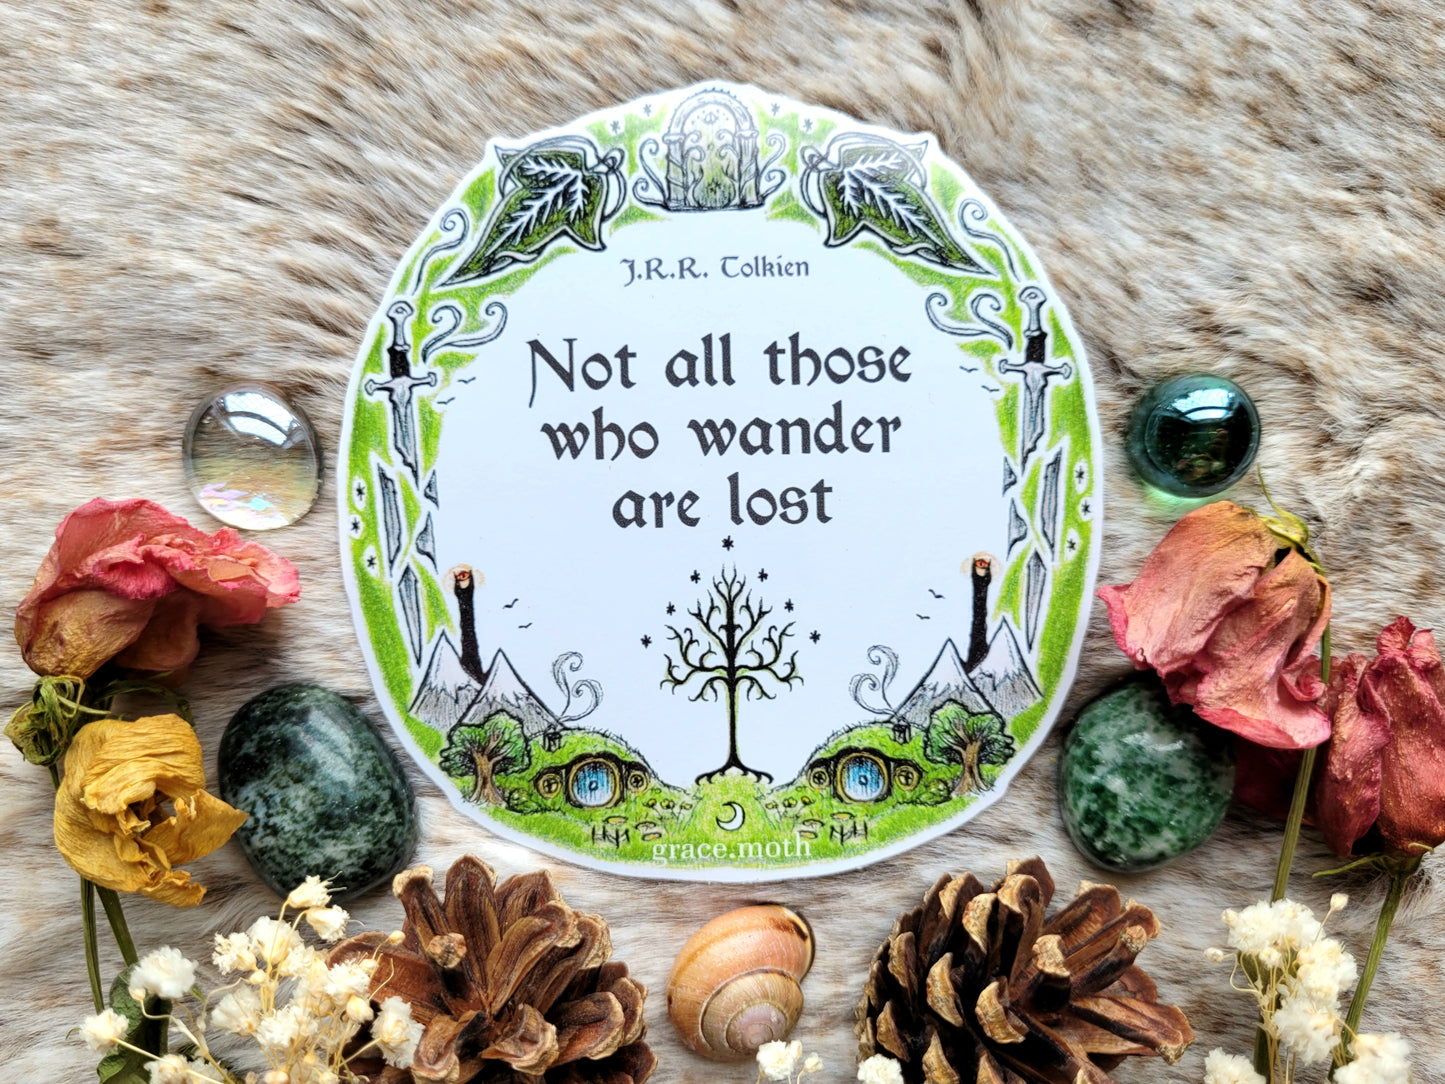 LOTR quote - Vinyl Sticker 10cm - Not all those who wander are lost - Lord of the rings - Cottagecore - Witchy - Gothic - Illustrated by Grace moth